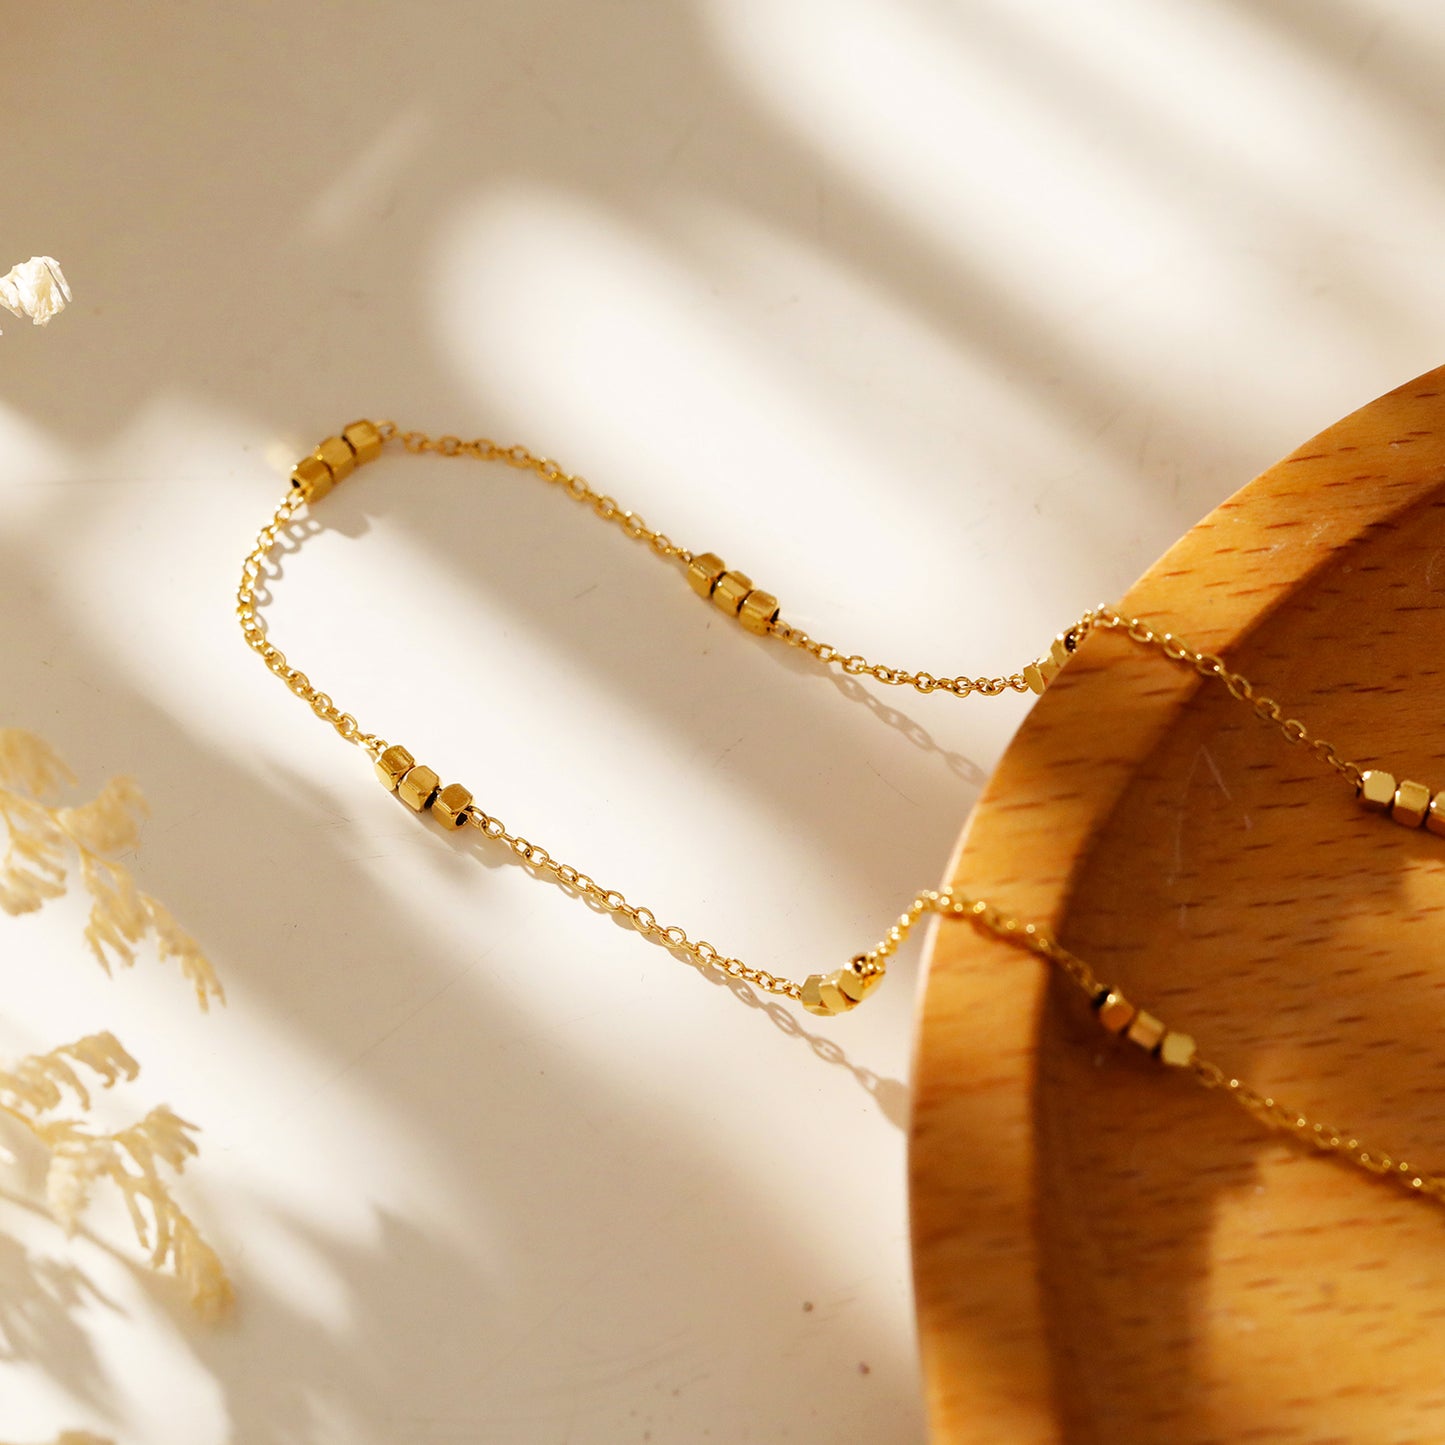 ERISSA: Tiny Square-Beads Dainty Gold Chain Necklace